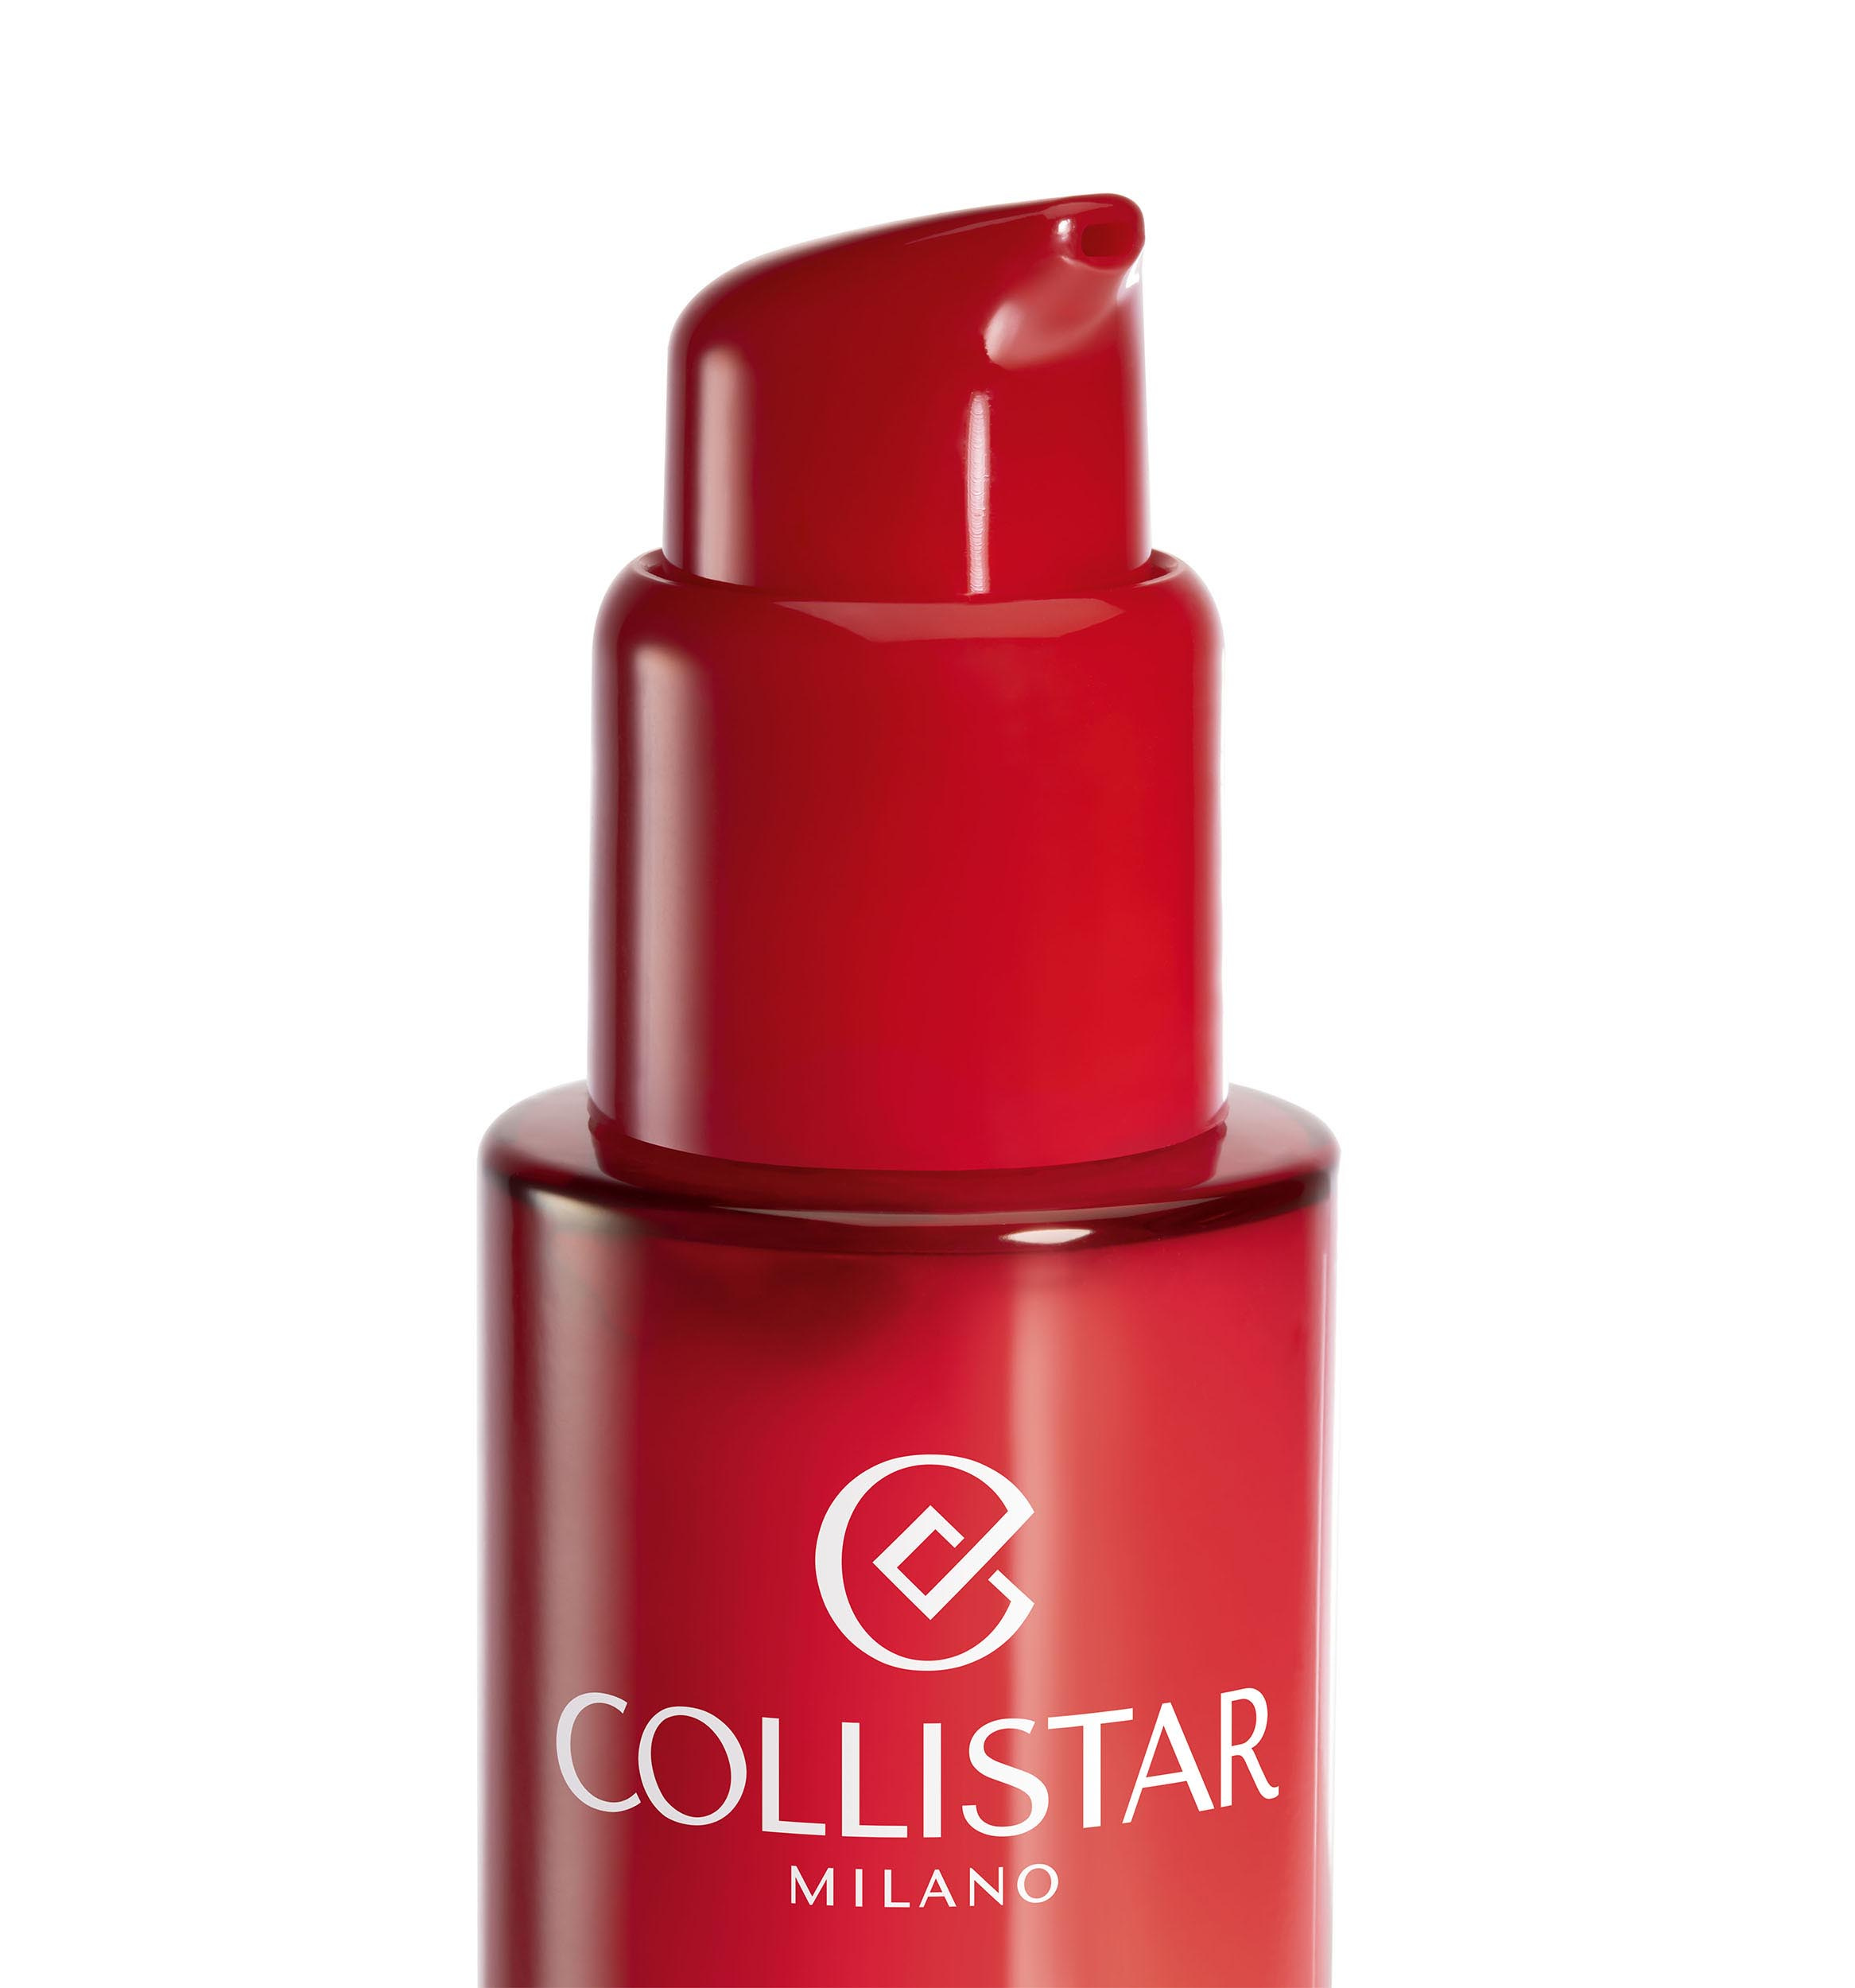 LIFT HD+ LIFTING REMODELING FACE AND NECK SERUM by Collistar